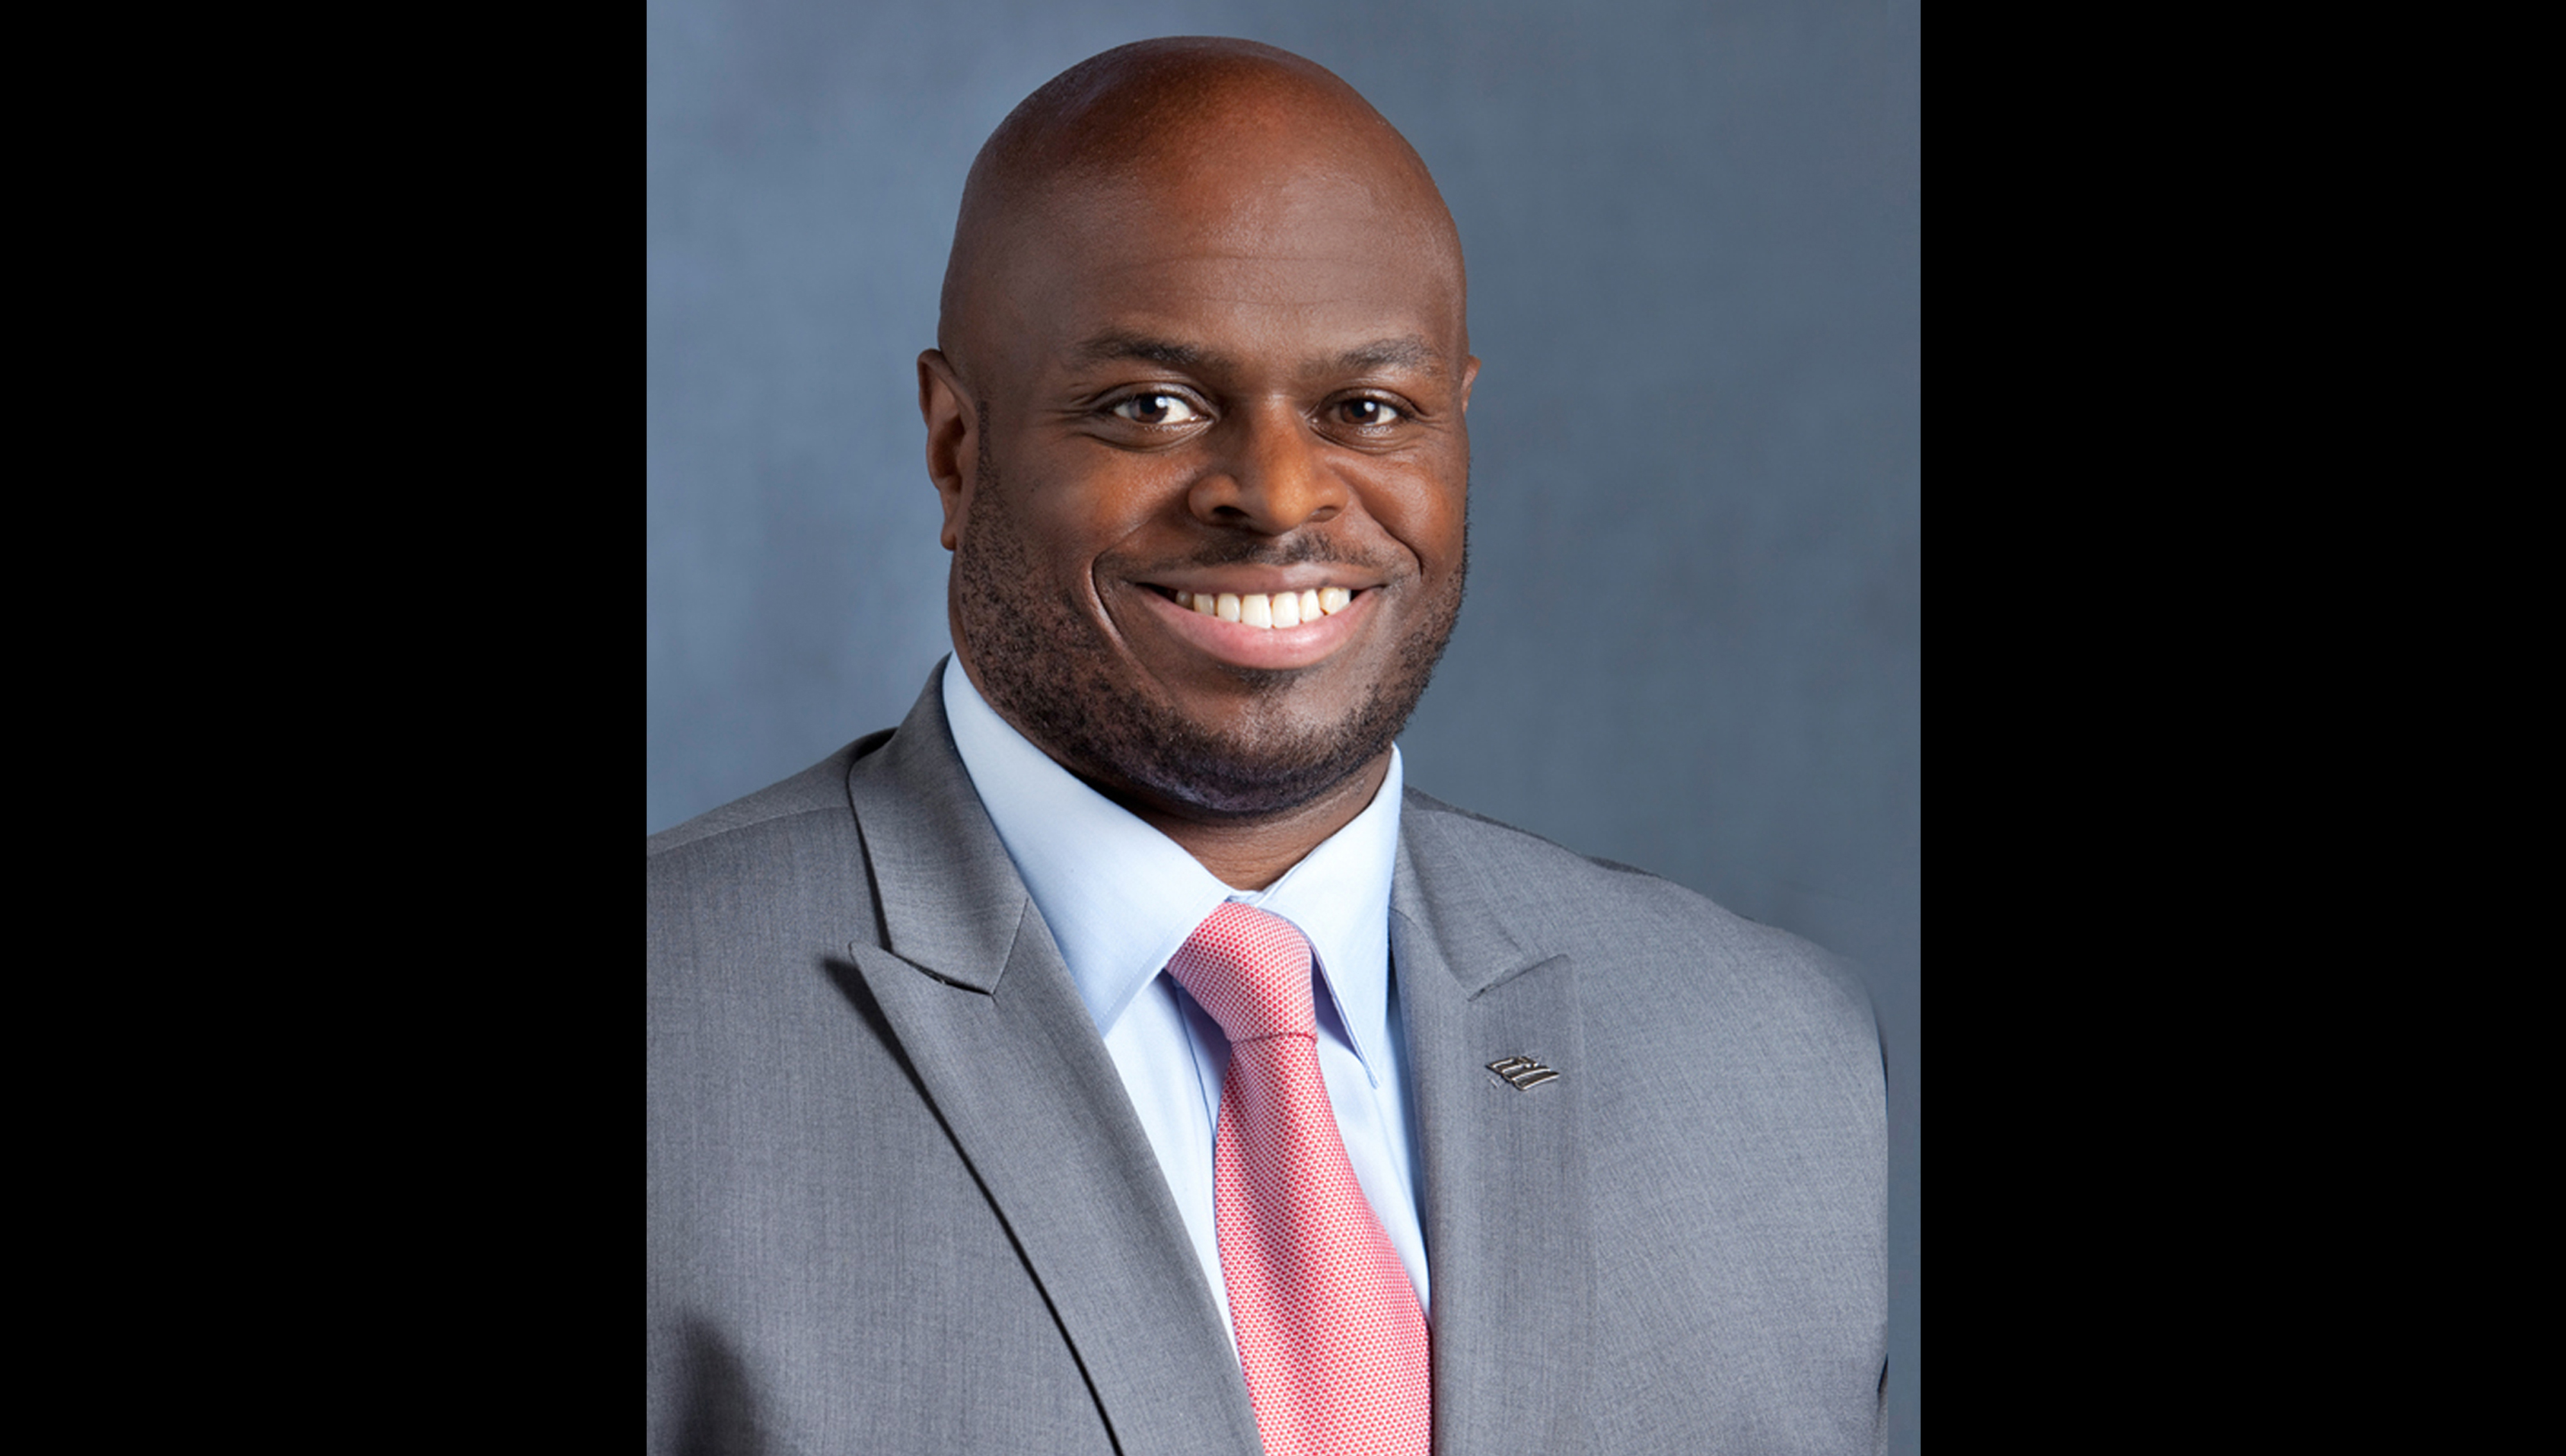 In an April 4 guest opinion piece in the News Journal, University President Tony Allen gives an update on how Delaware State University has responded to the COVID-19 pandemic.